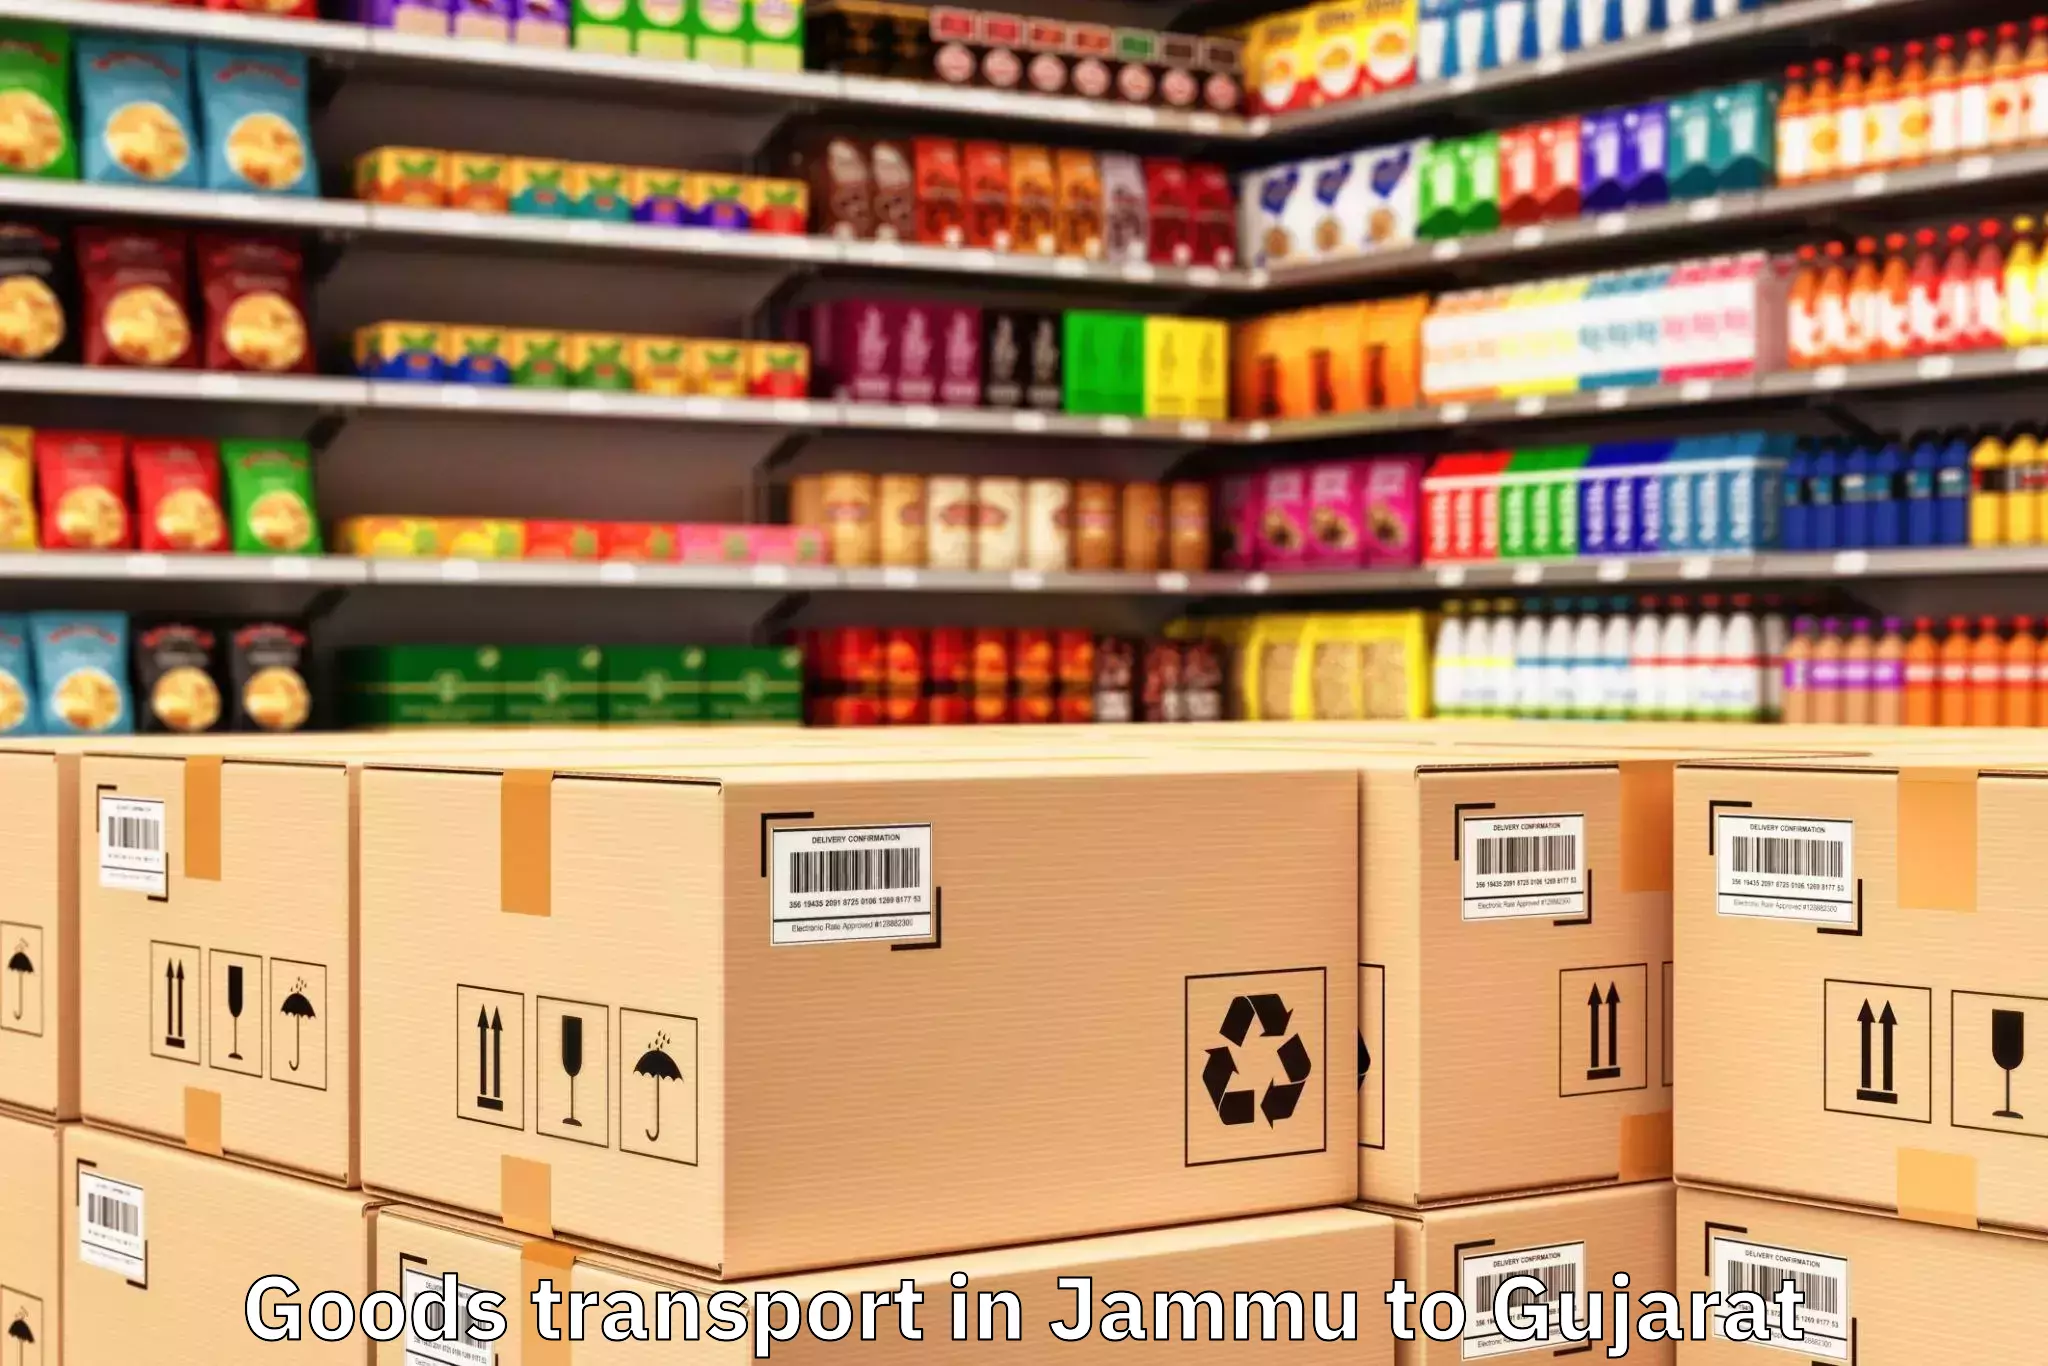 Easy Jammu to Ahmedabad Airport Amd Goods Transport Booking